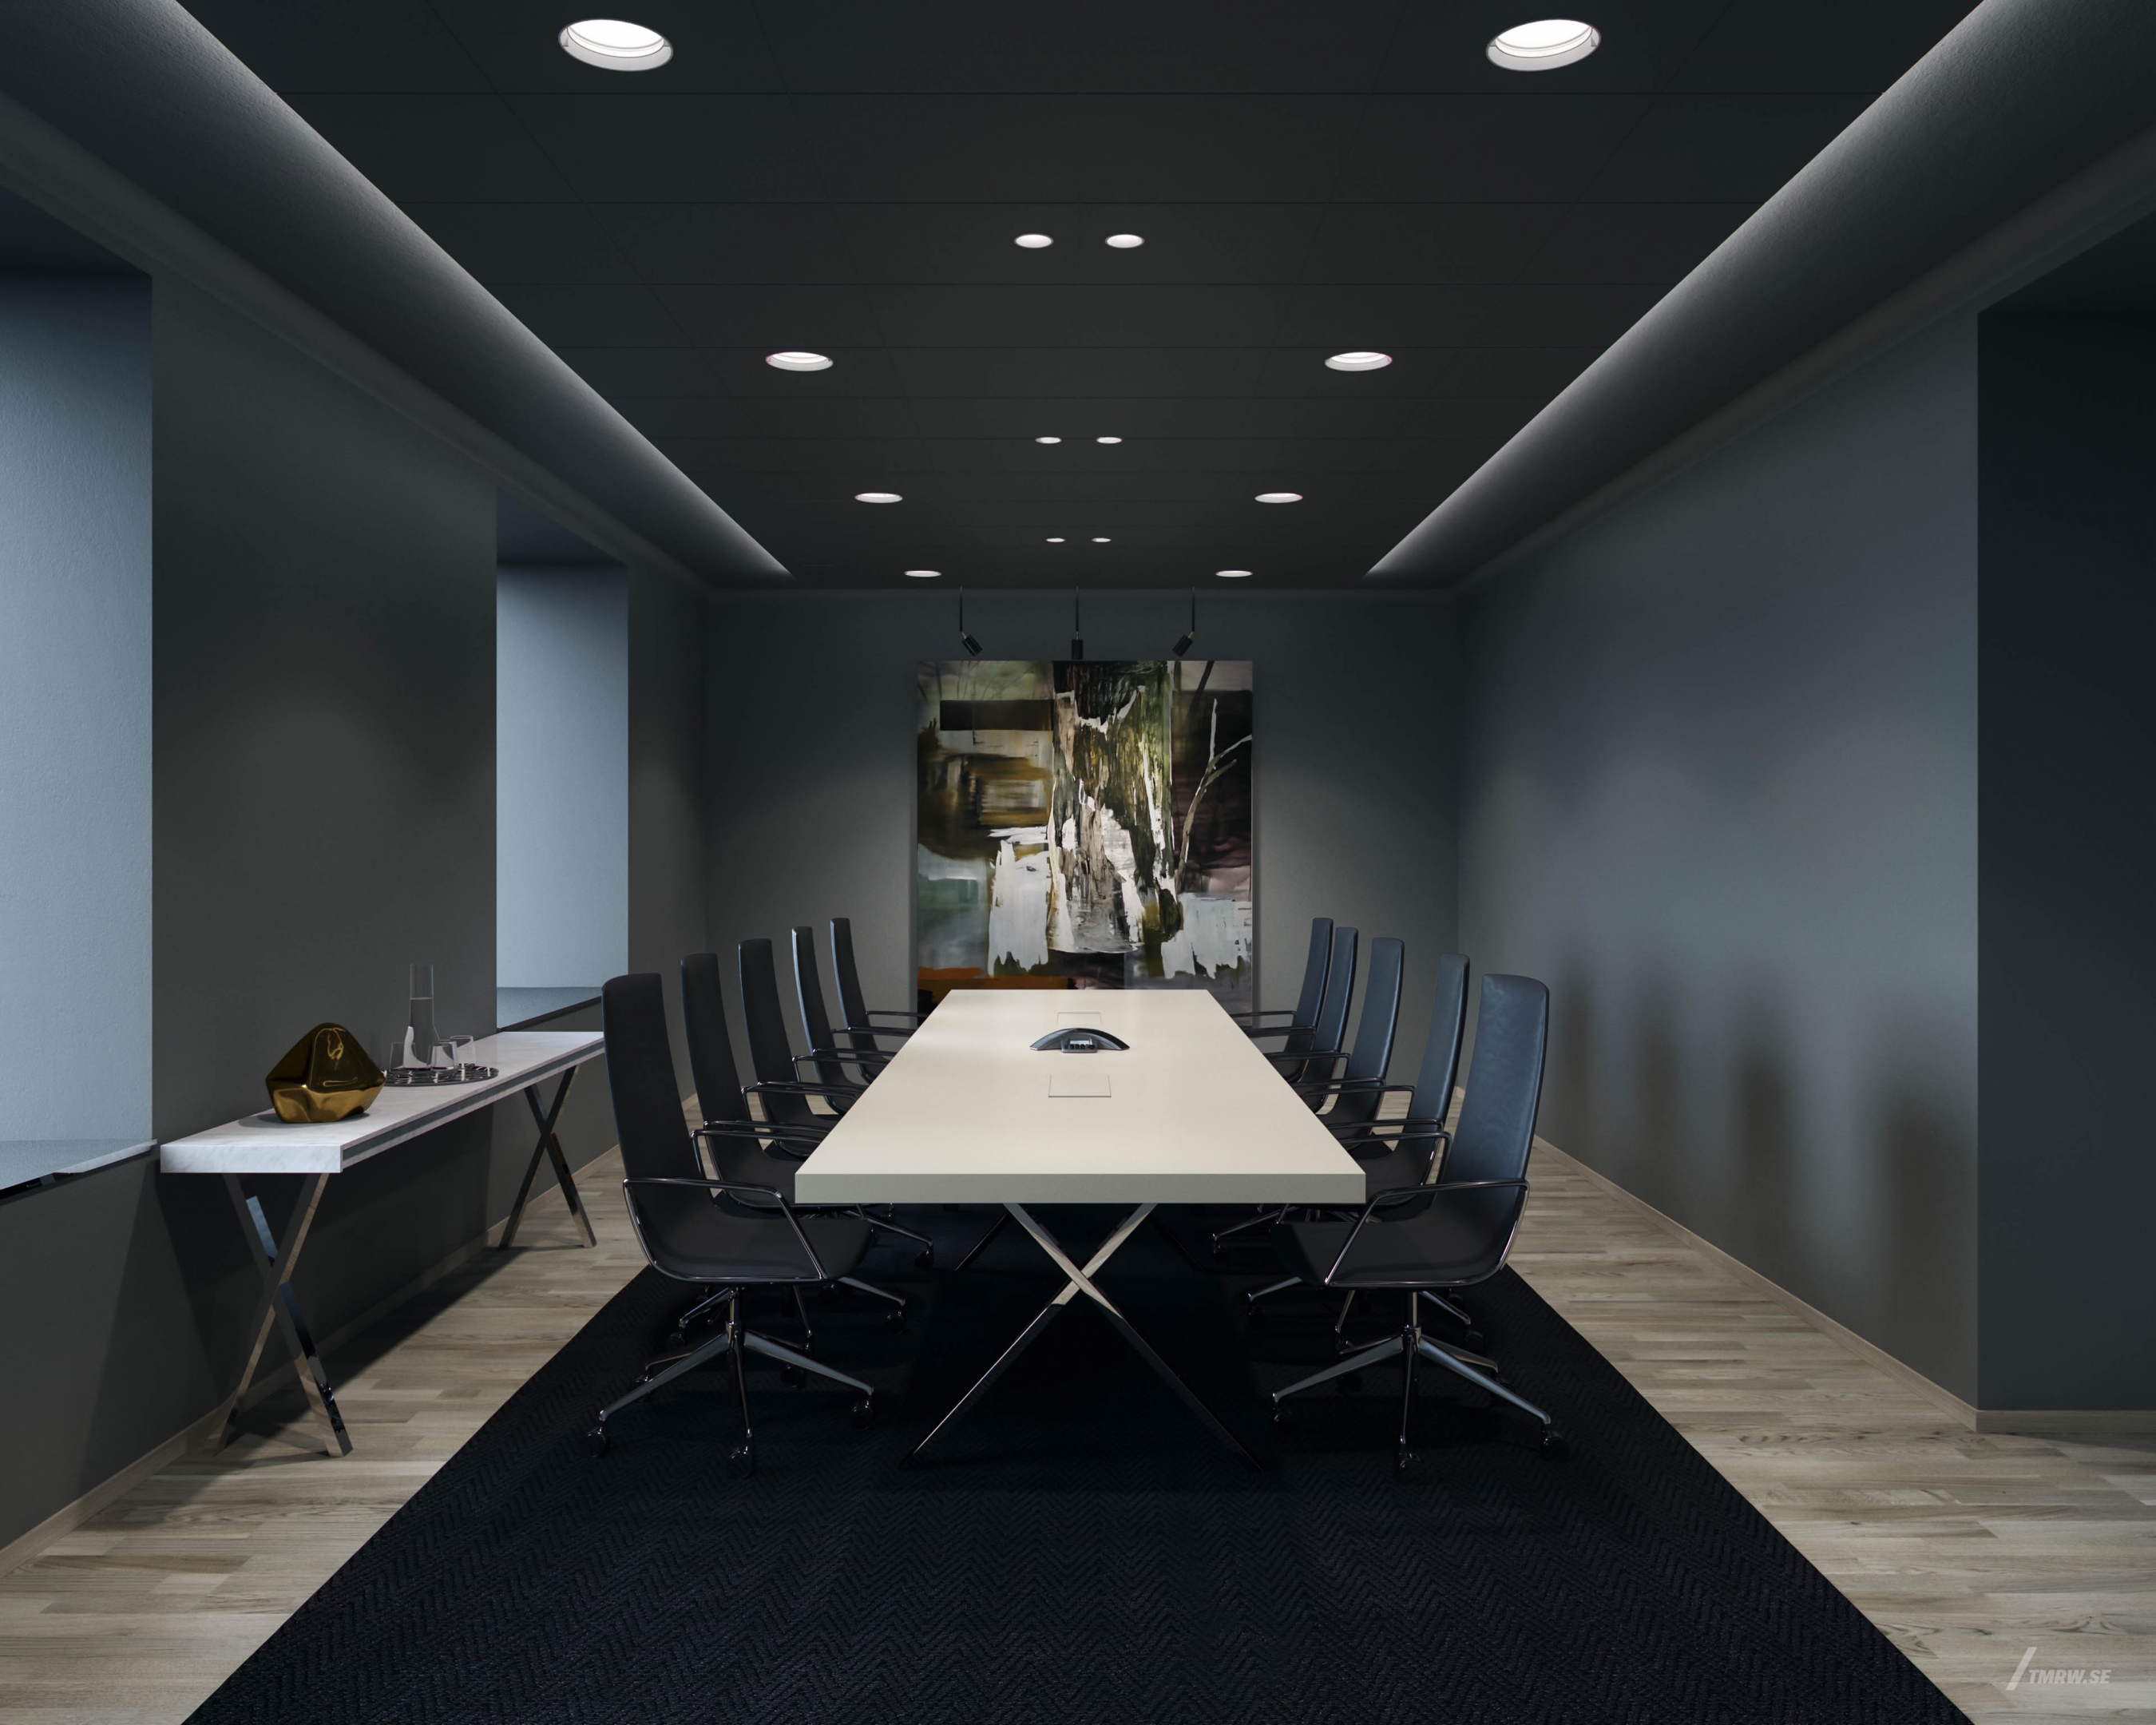 Architectural visualization of Dice for Studio Stockhom, a conference room in dim light from an eye level view.